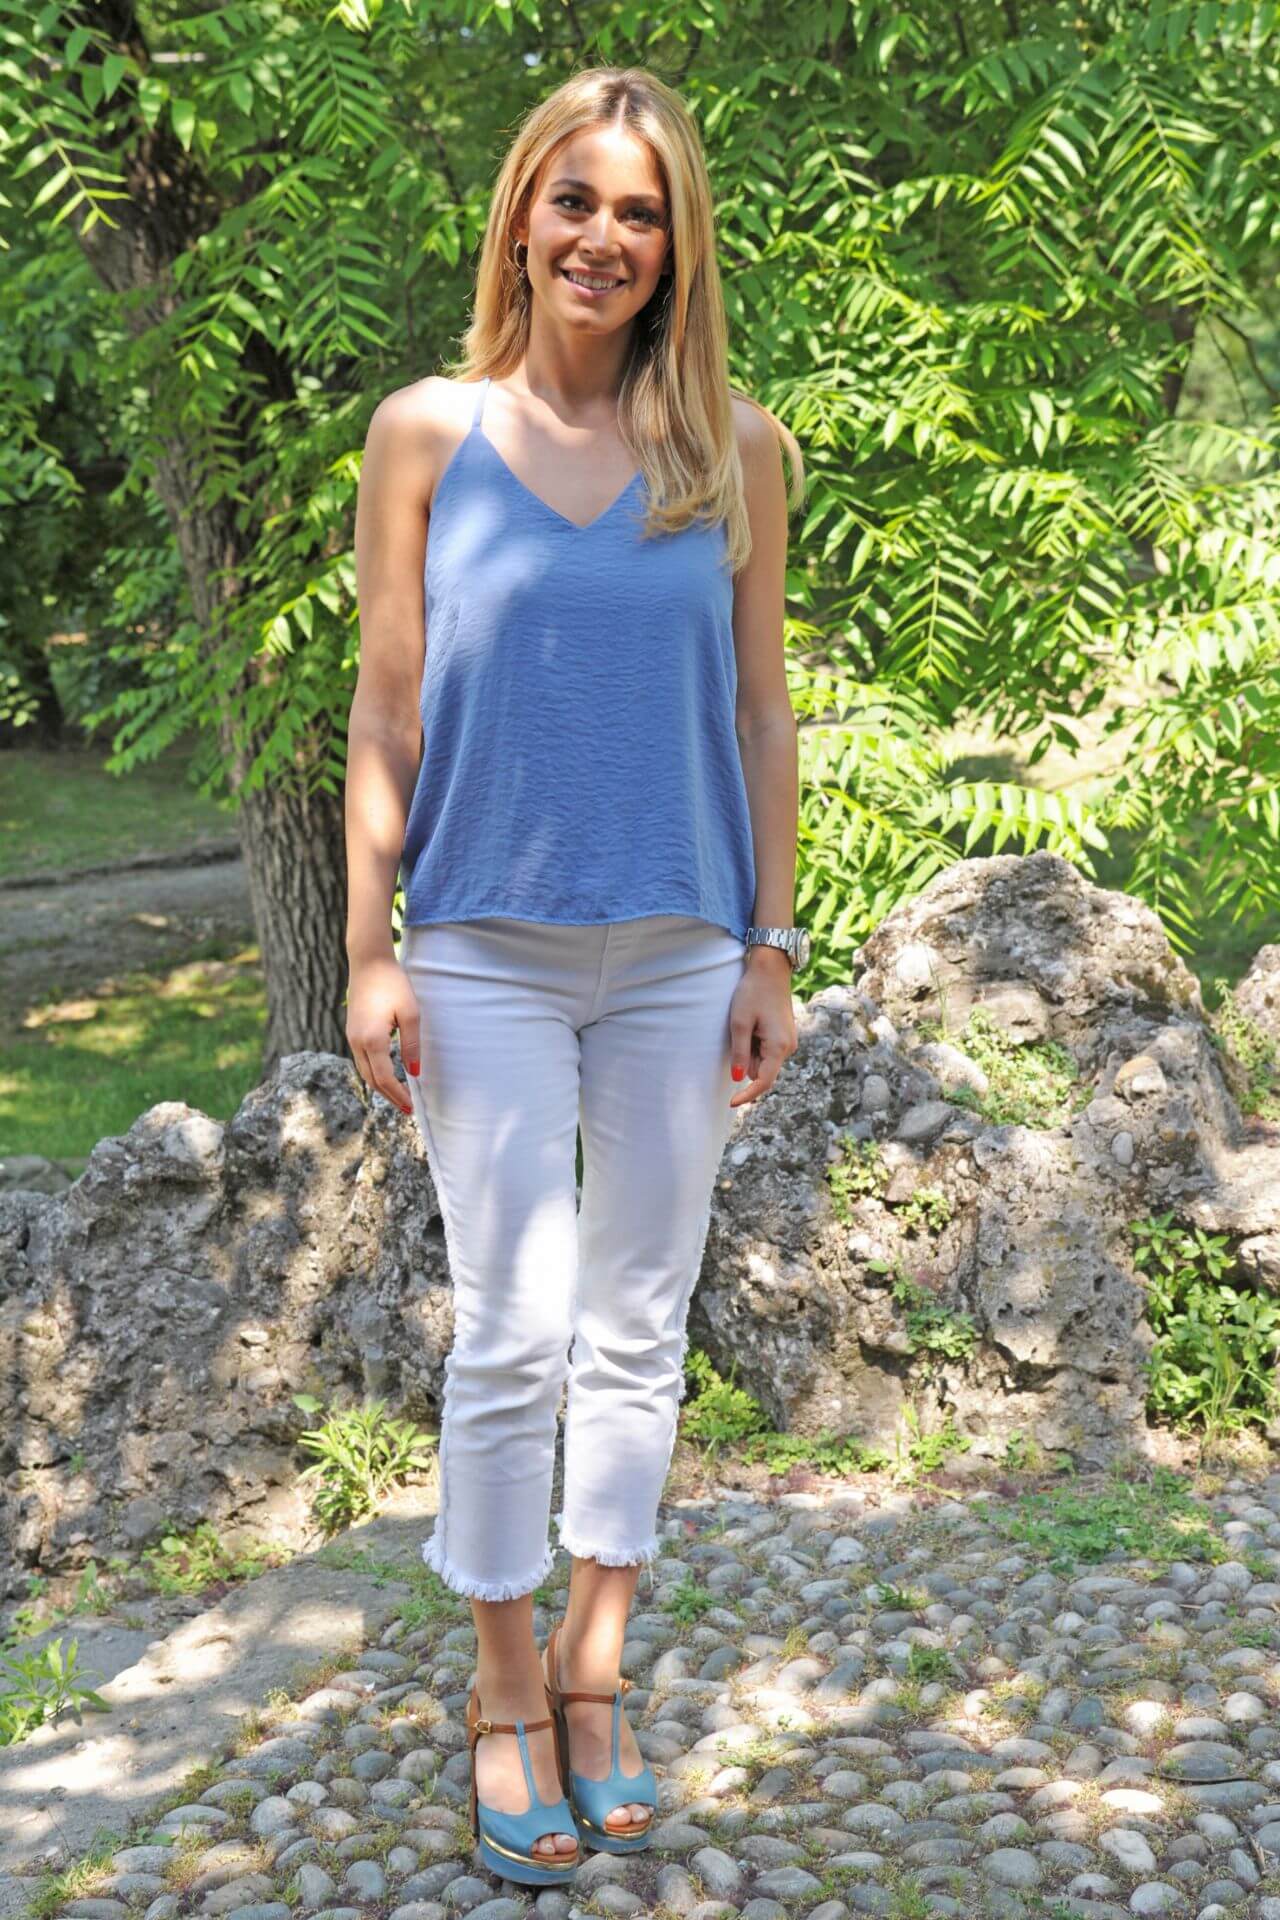 Diletta Leotta In Blue Top With White Jeans